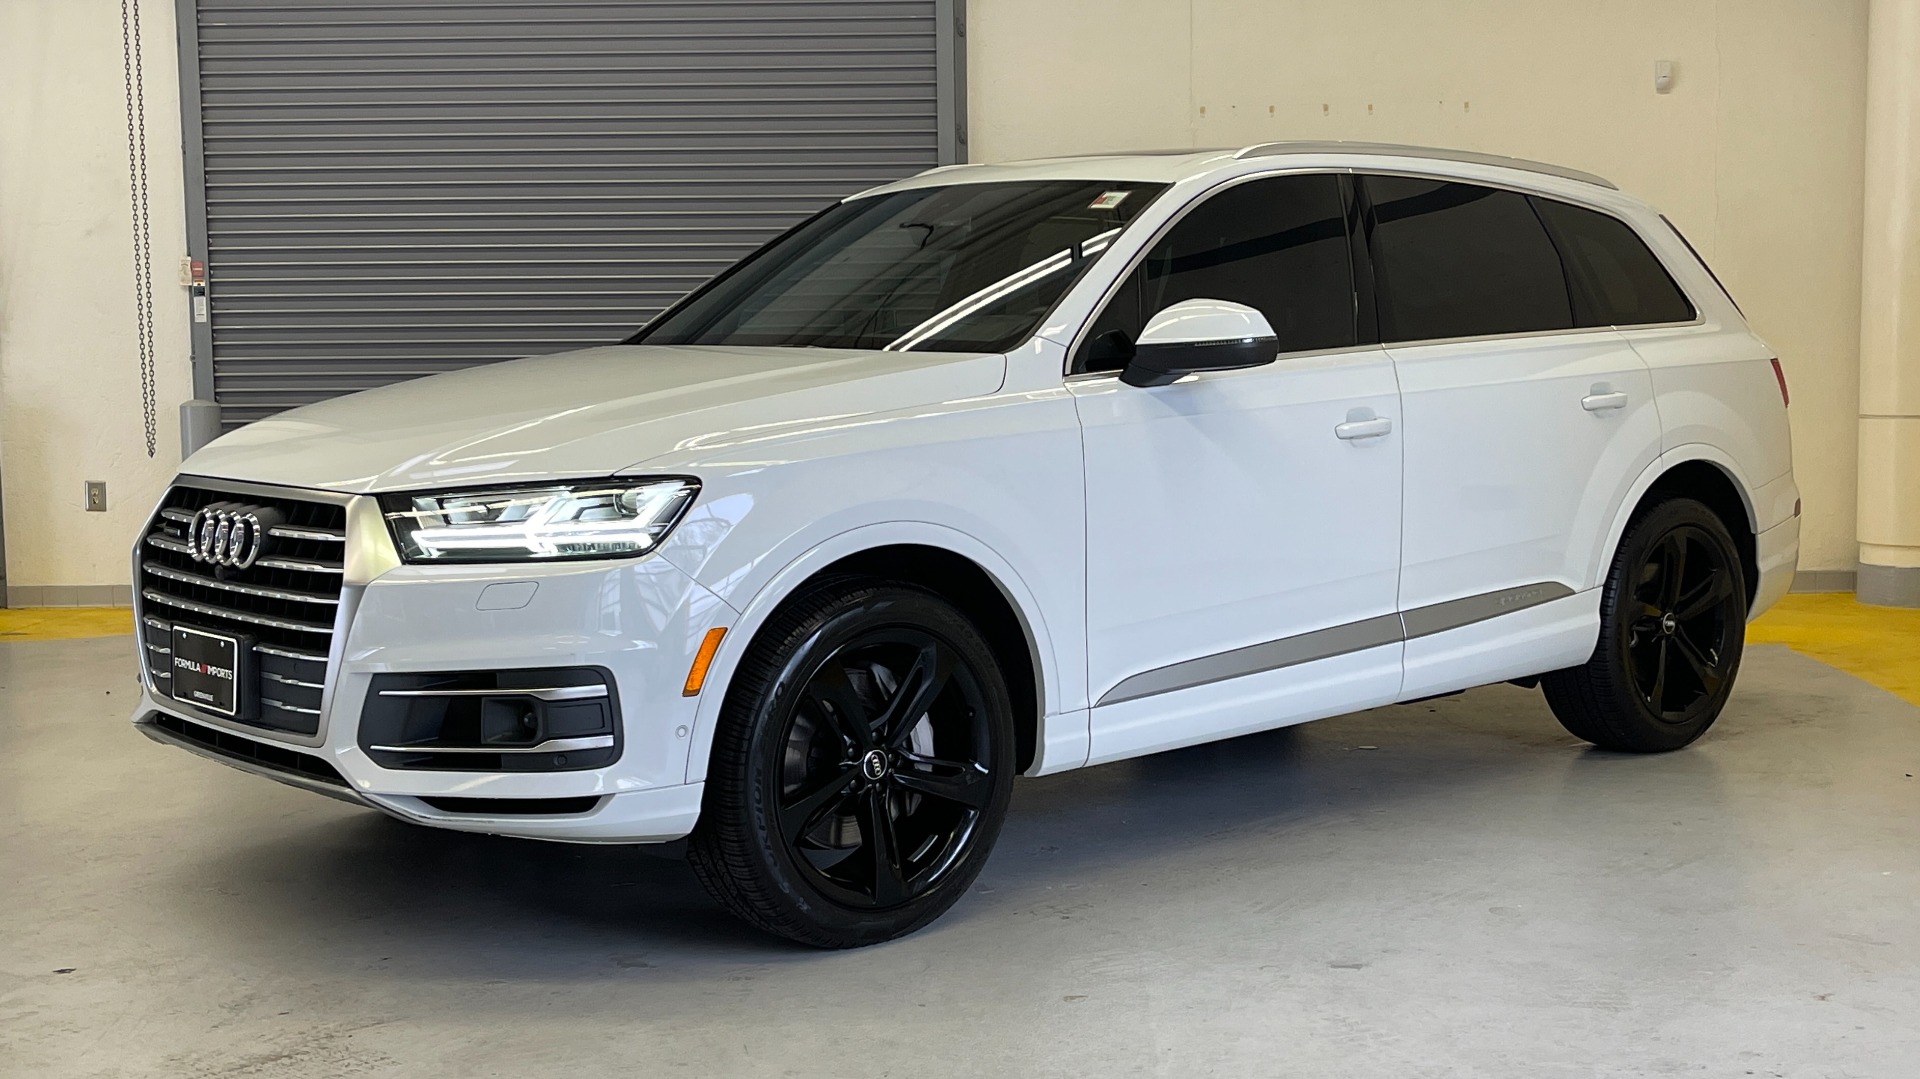 Used 2019 Audi Q7 PRESTIGE / NAV / SUNROOF / LANE ASST / TOWING / 21-IN WHLS / REA for sale $60,995 at Formula Imports in Charlotte NC 28227 3